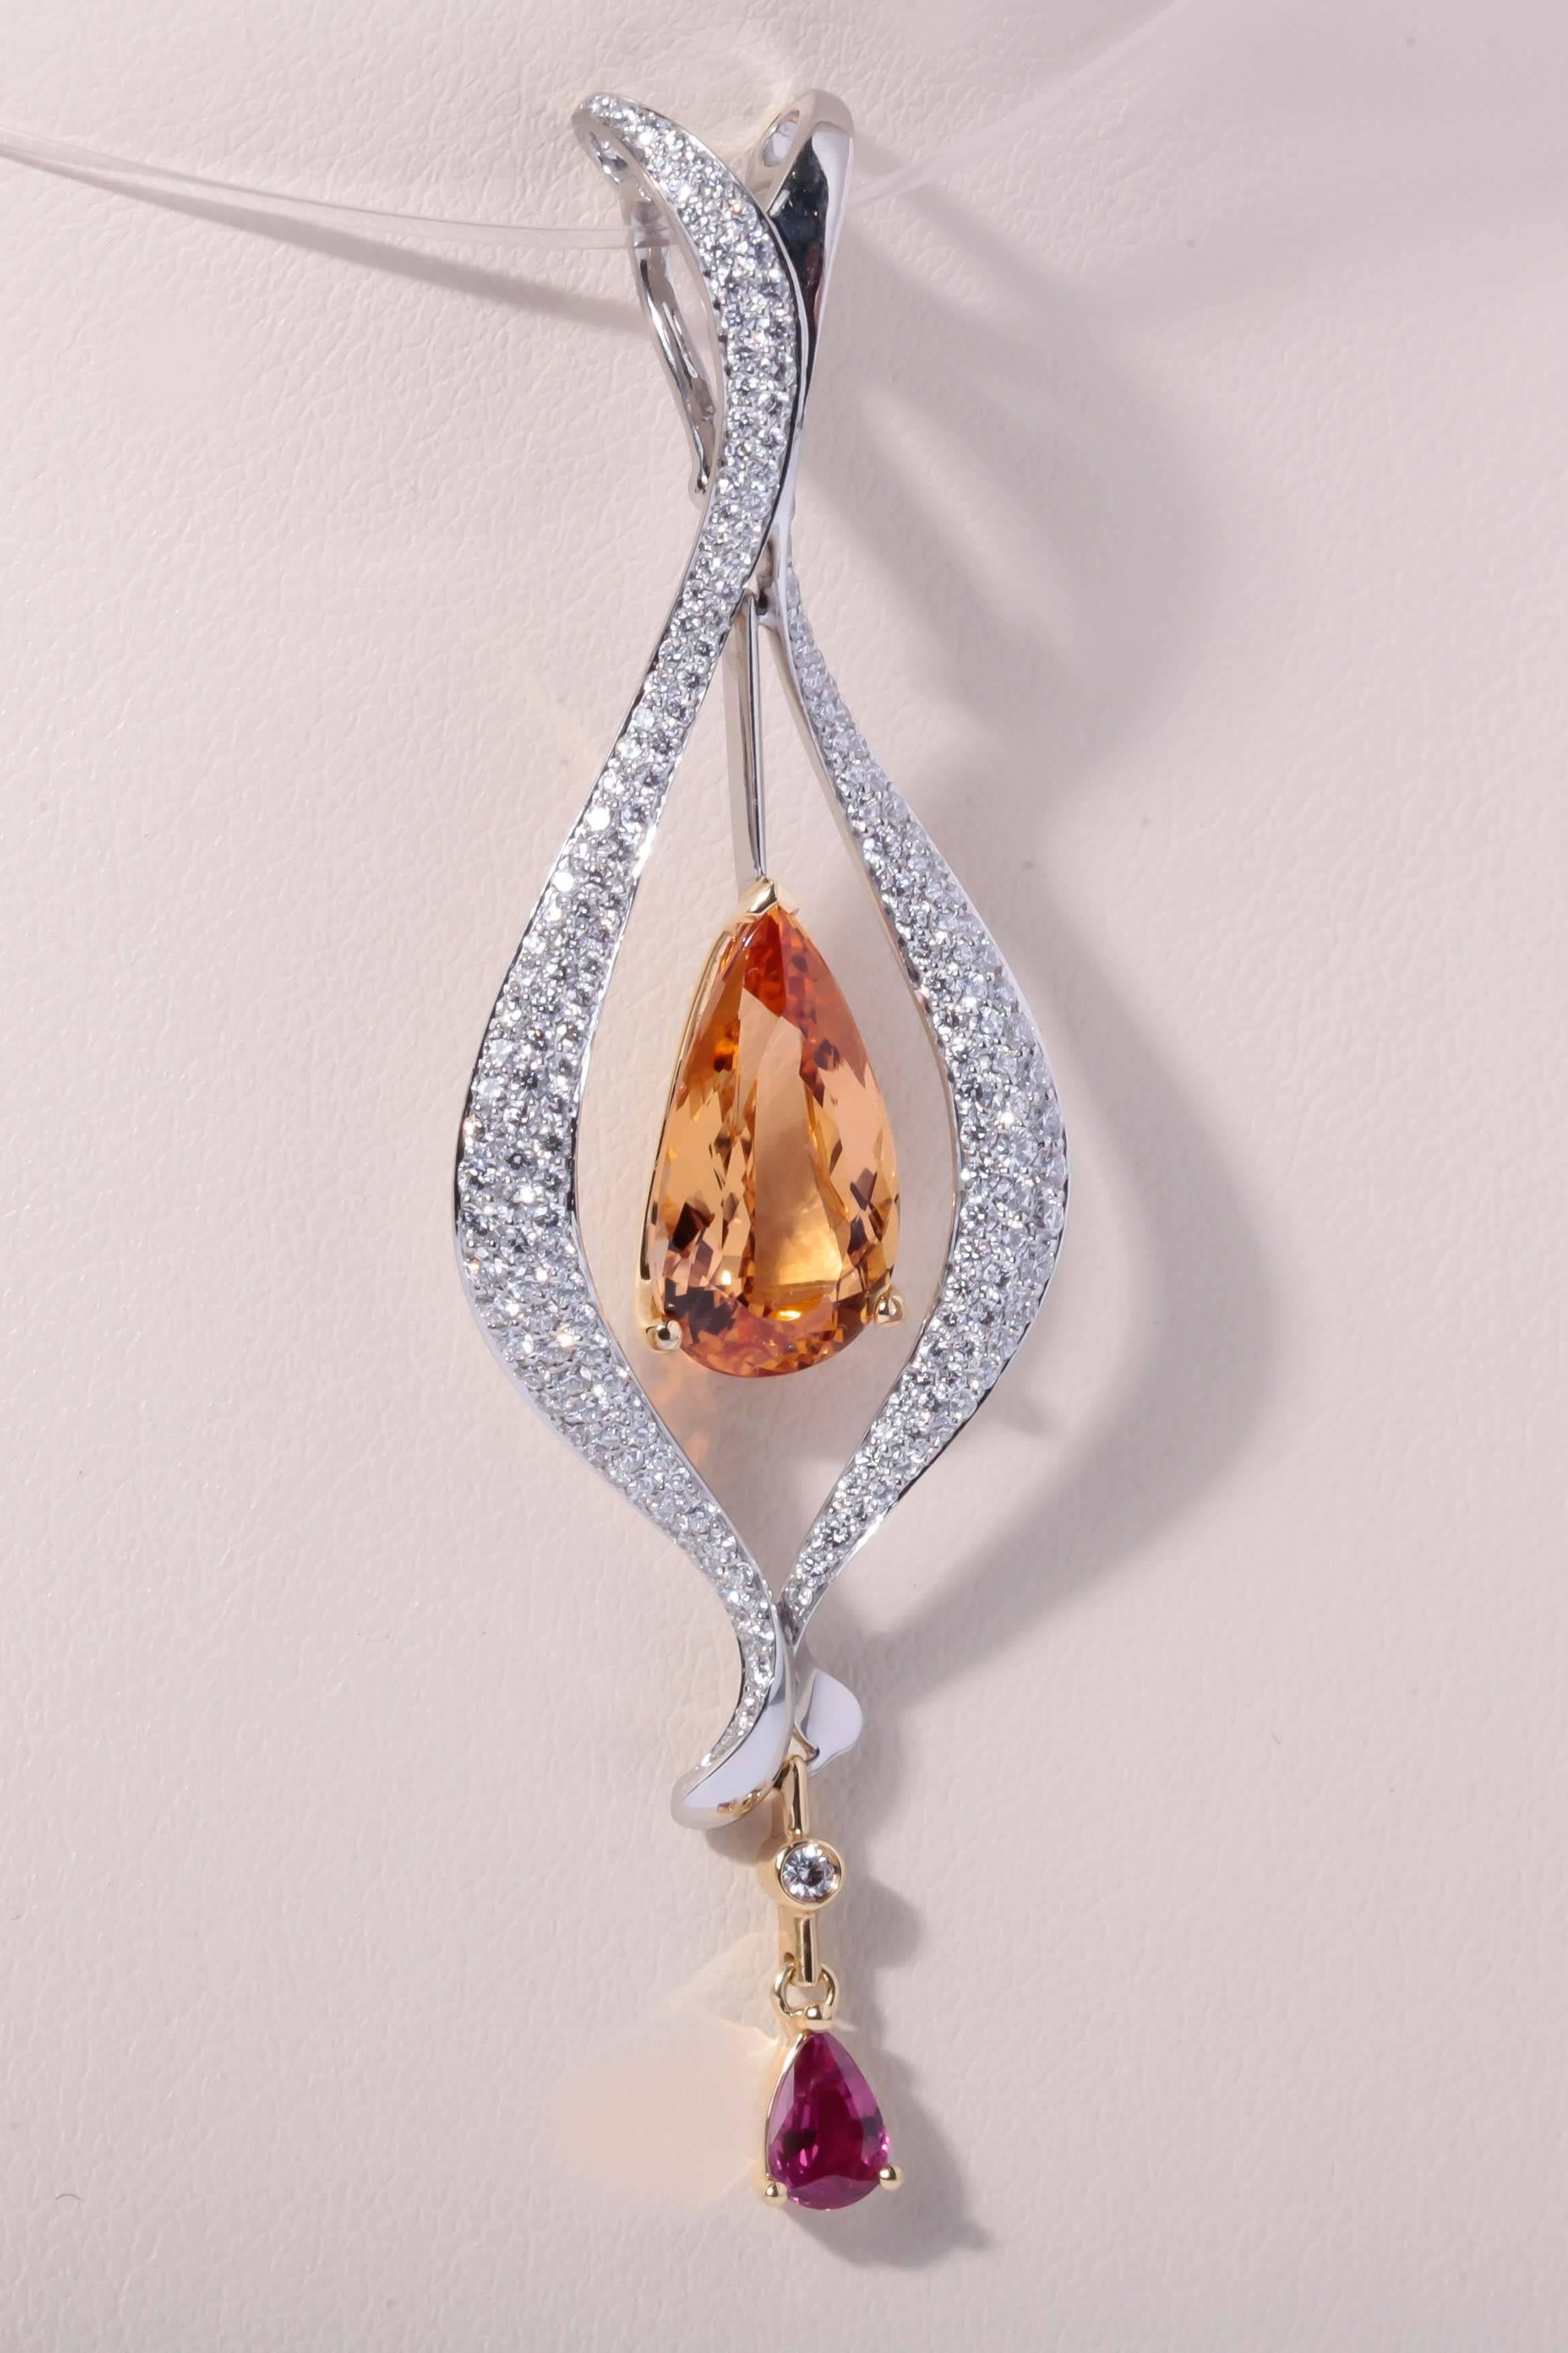 Richard Krementz Topaz set in Platinum and 18 K gold with accent pear shape .47 ct.Ruby.  Brazilian Topaz weighing 5.43 ct. surrouned with 1.41 cts of pave diamonds.  For 140 years, the Krementz family made fine jewelry of exceptional quality in